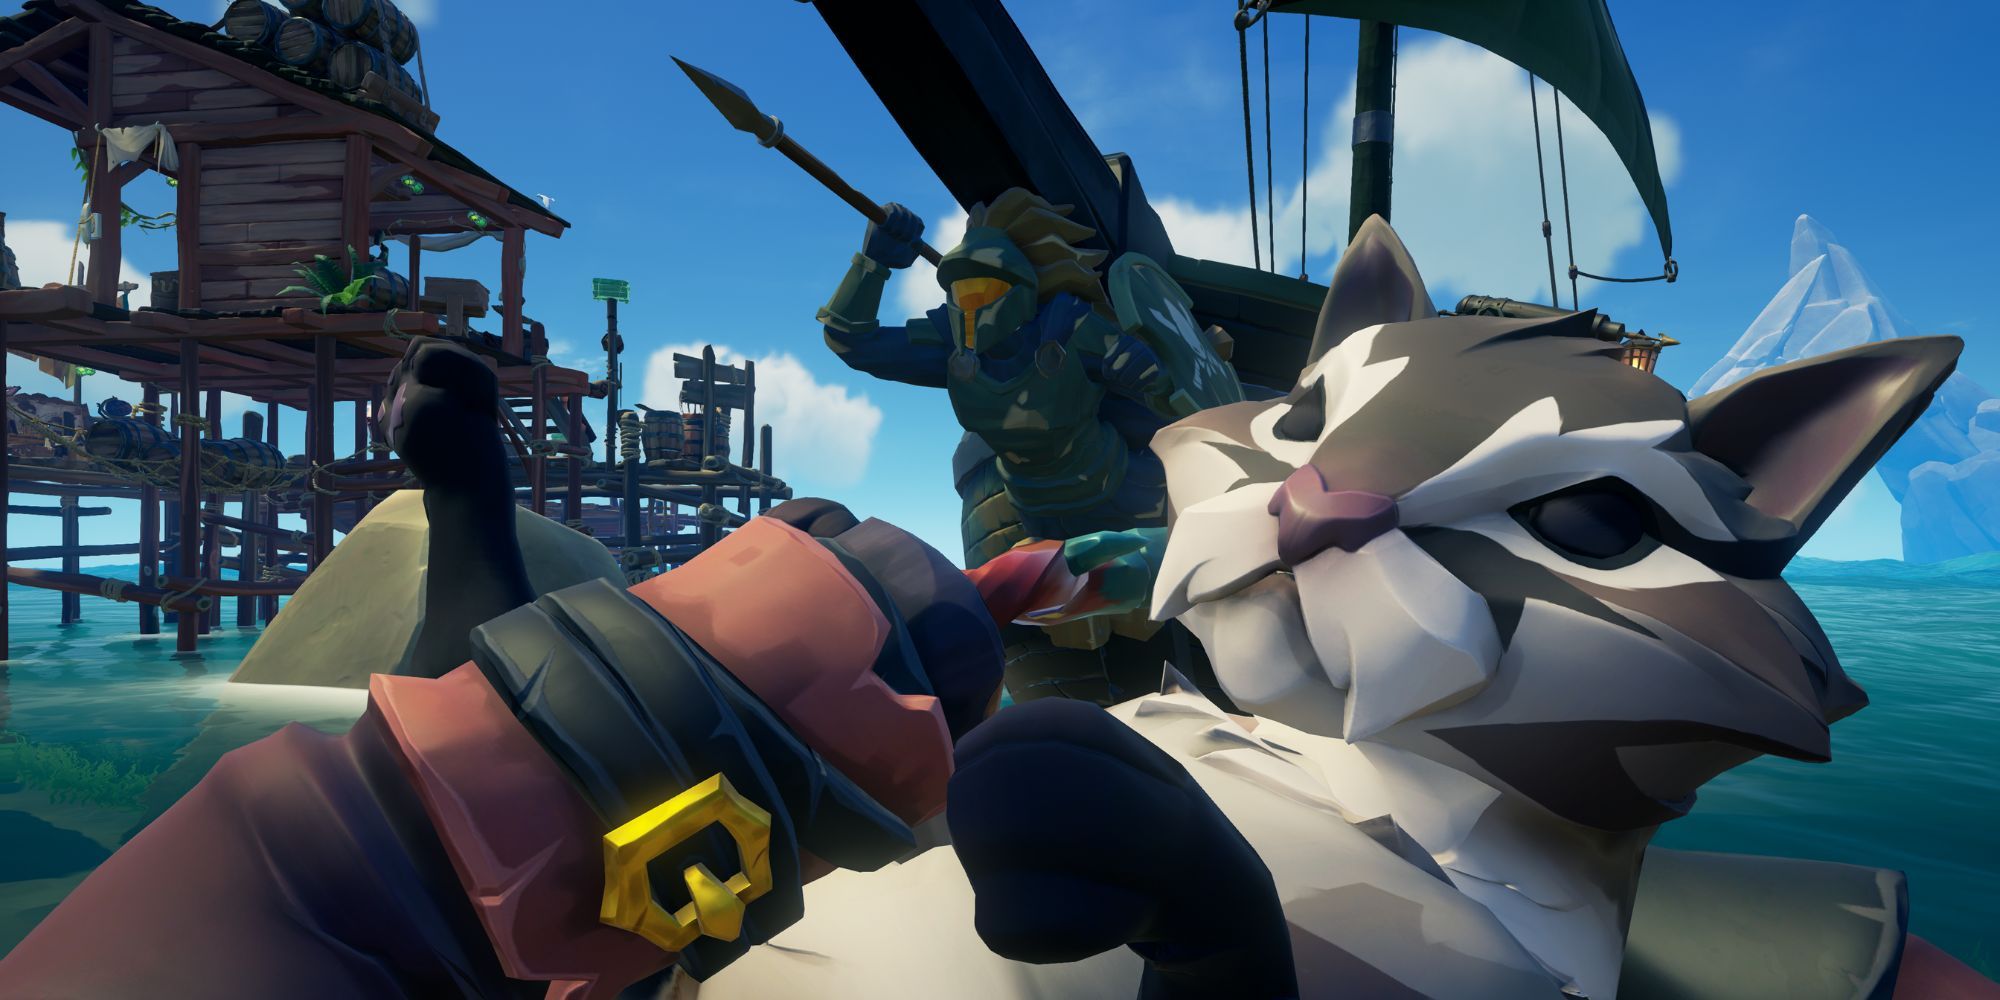 A cat in Sea of Thieves.